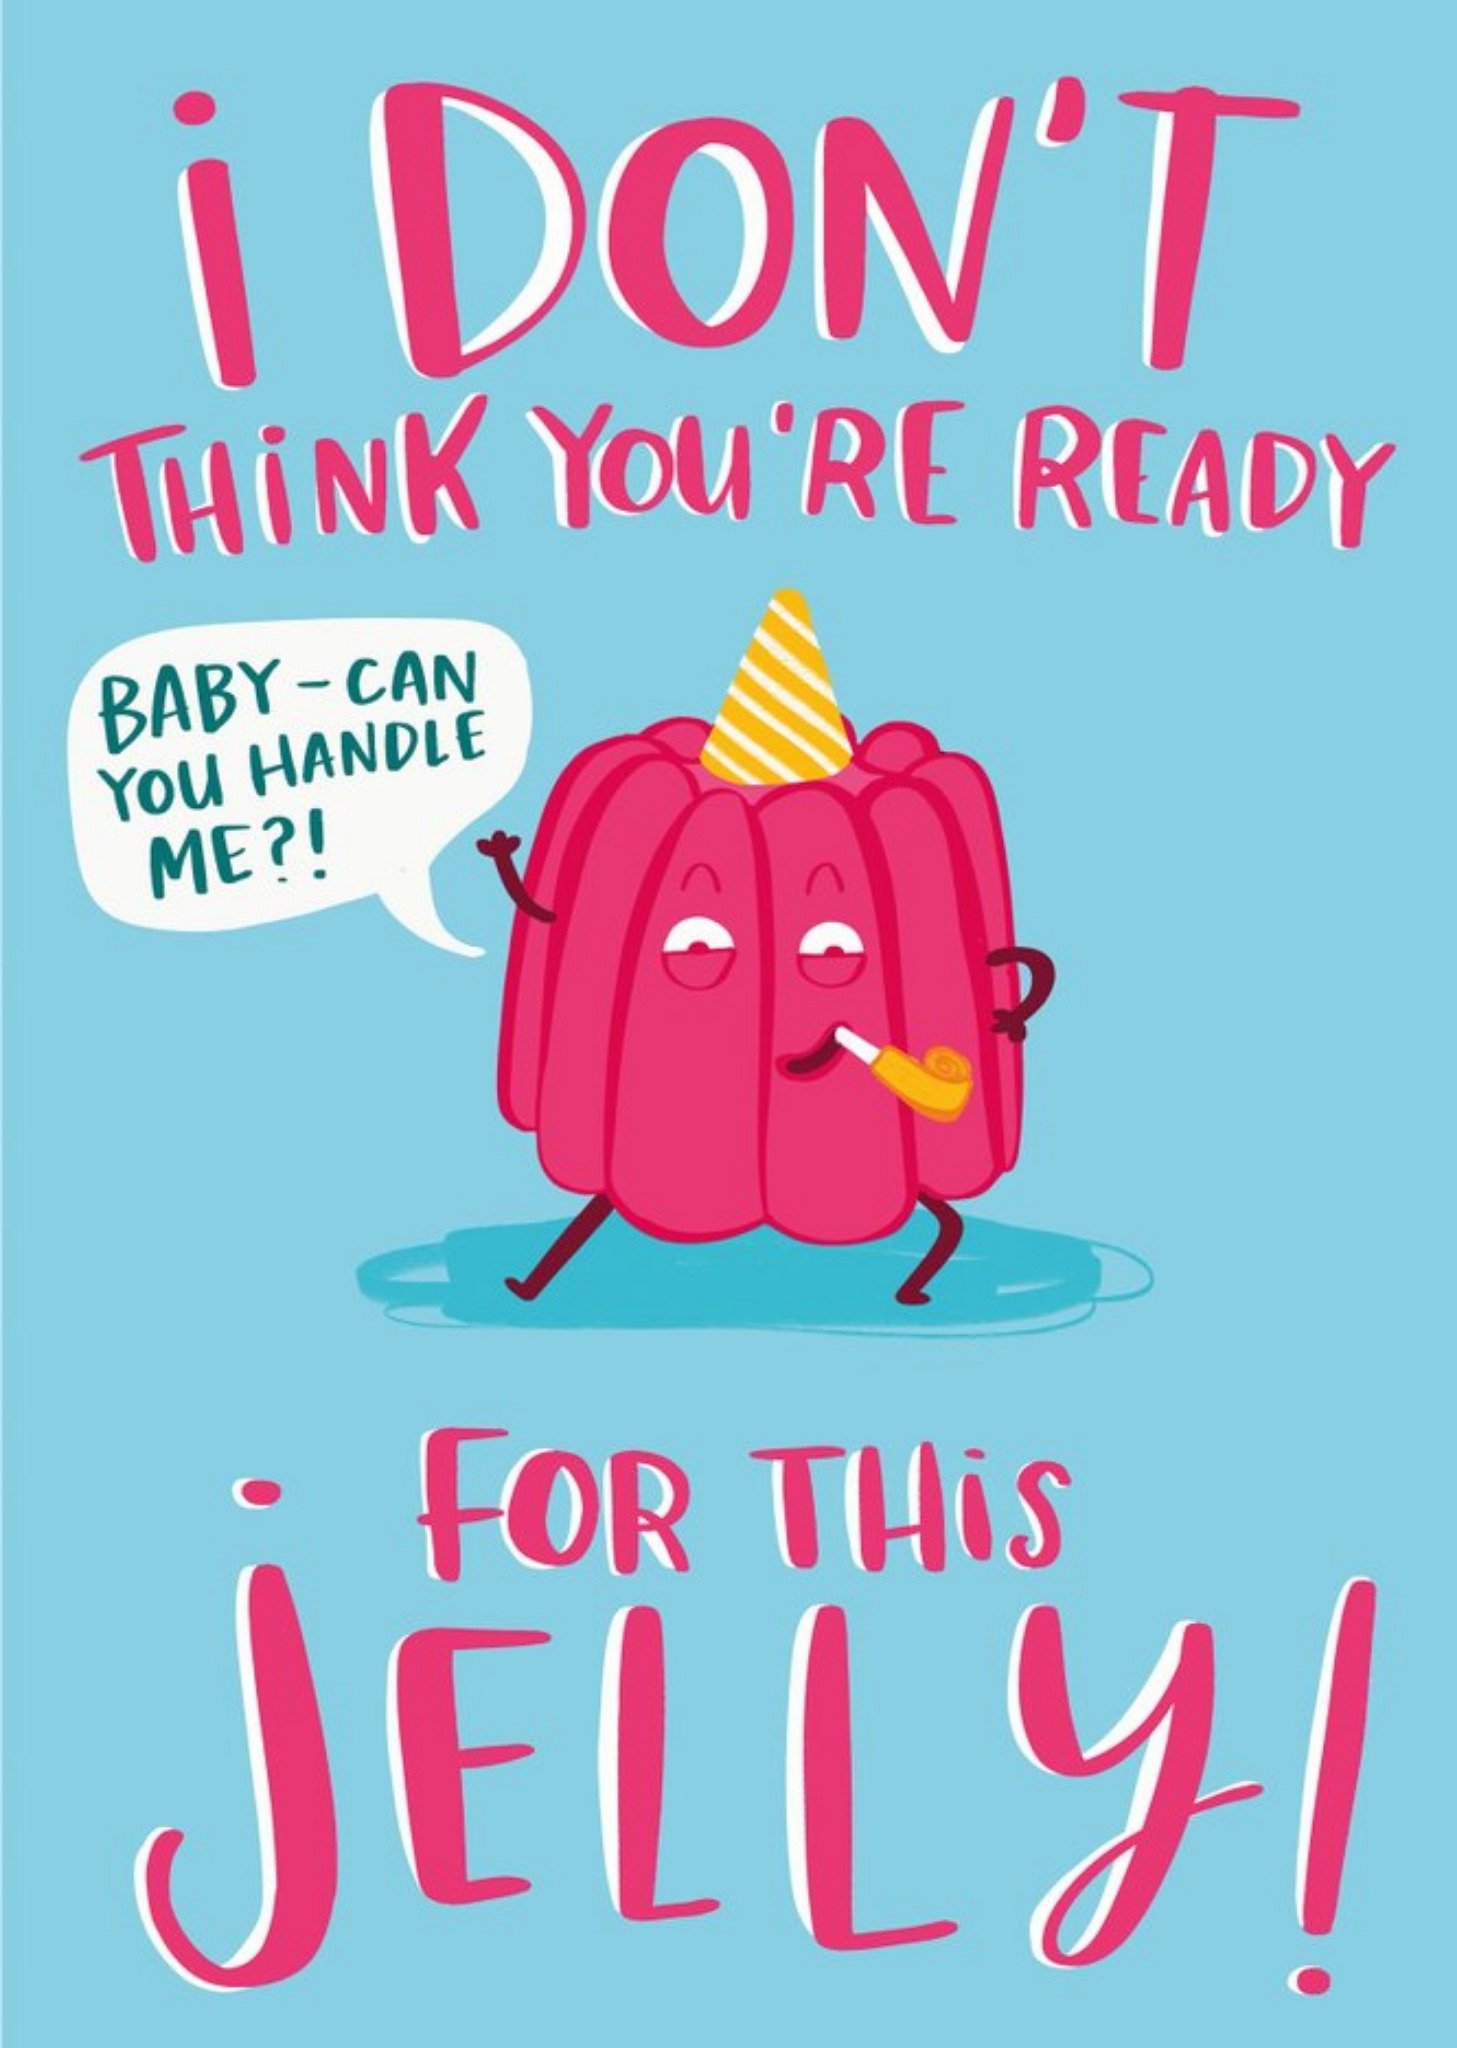 Moonpig Lucy Maggie Ready For This Jelly Funny Birthday Card, Large